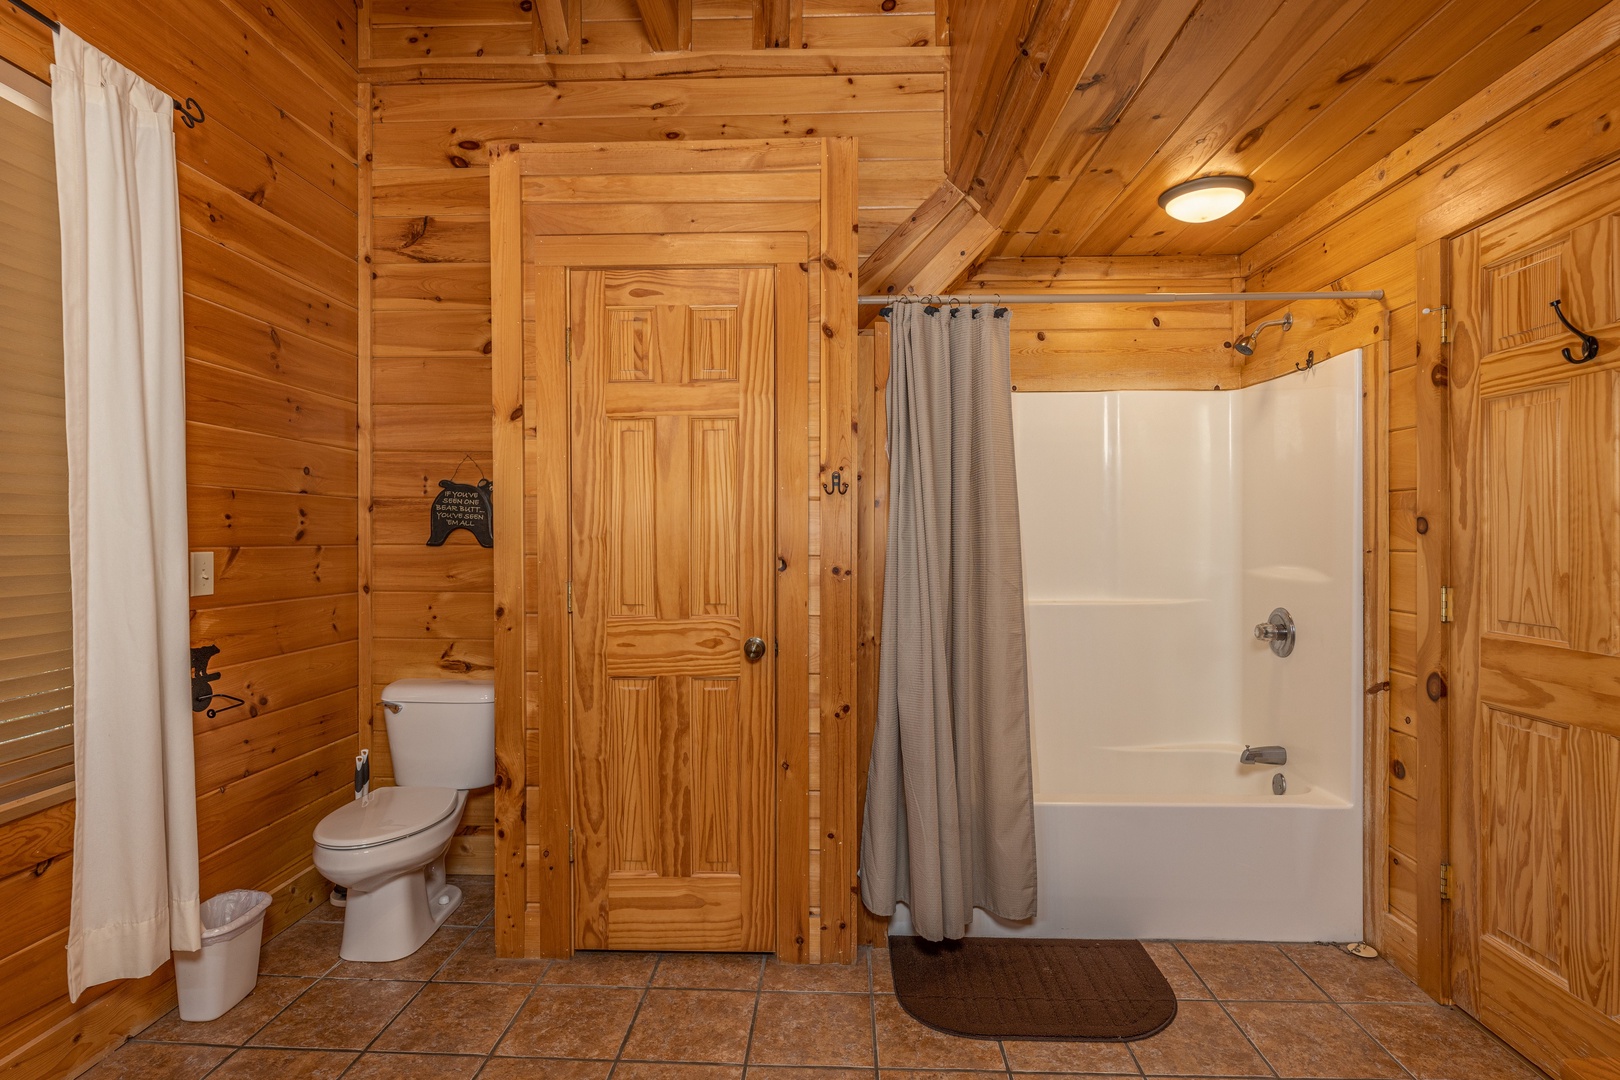 Bathroom with a tub and shower at Bears Don't Bluff, a 3 bedroom cabin rental located in Pigeon Forge